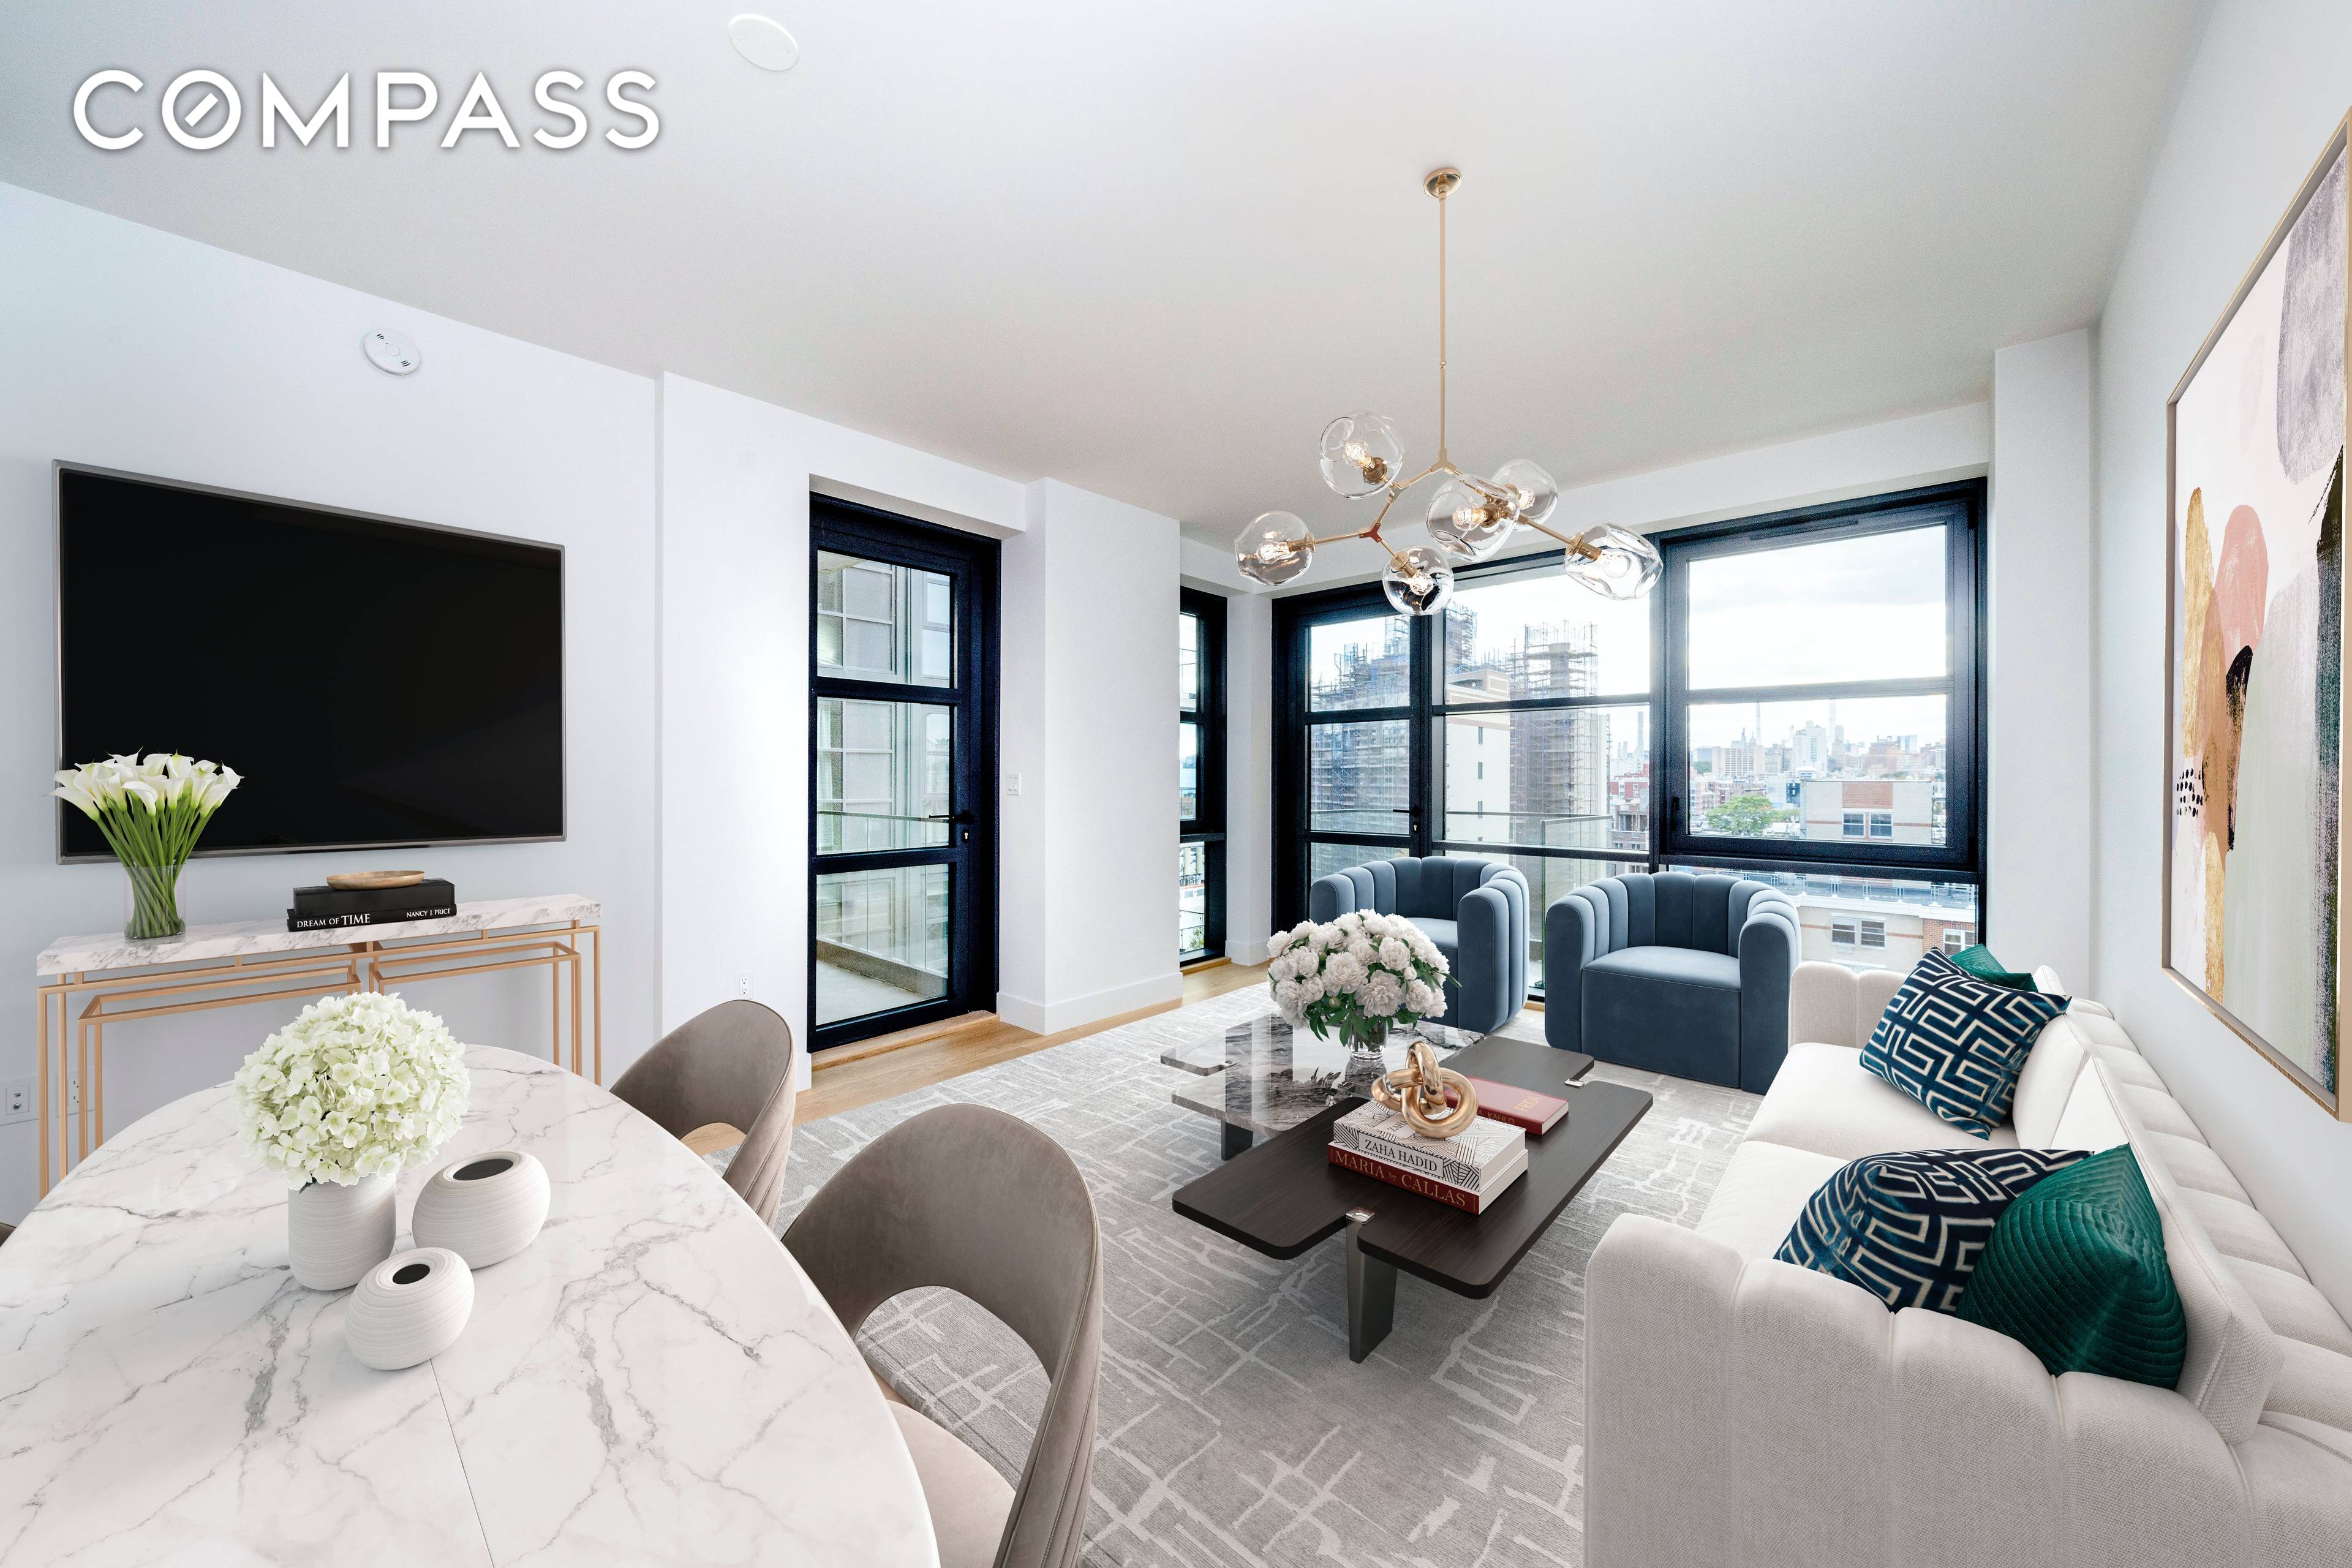 First one bed apartment for rent in this absolutely stunning new development a stone s throw away from the express trains and vibrant 125th Street shopping area.